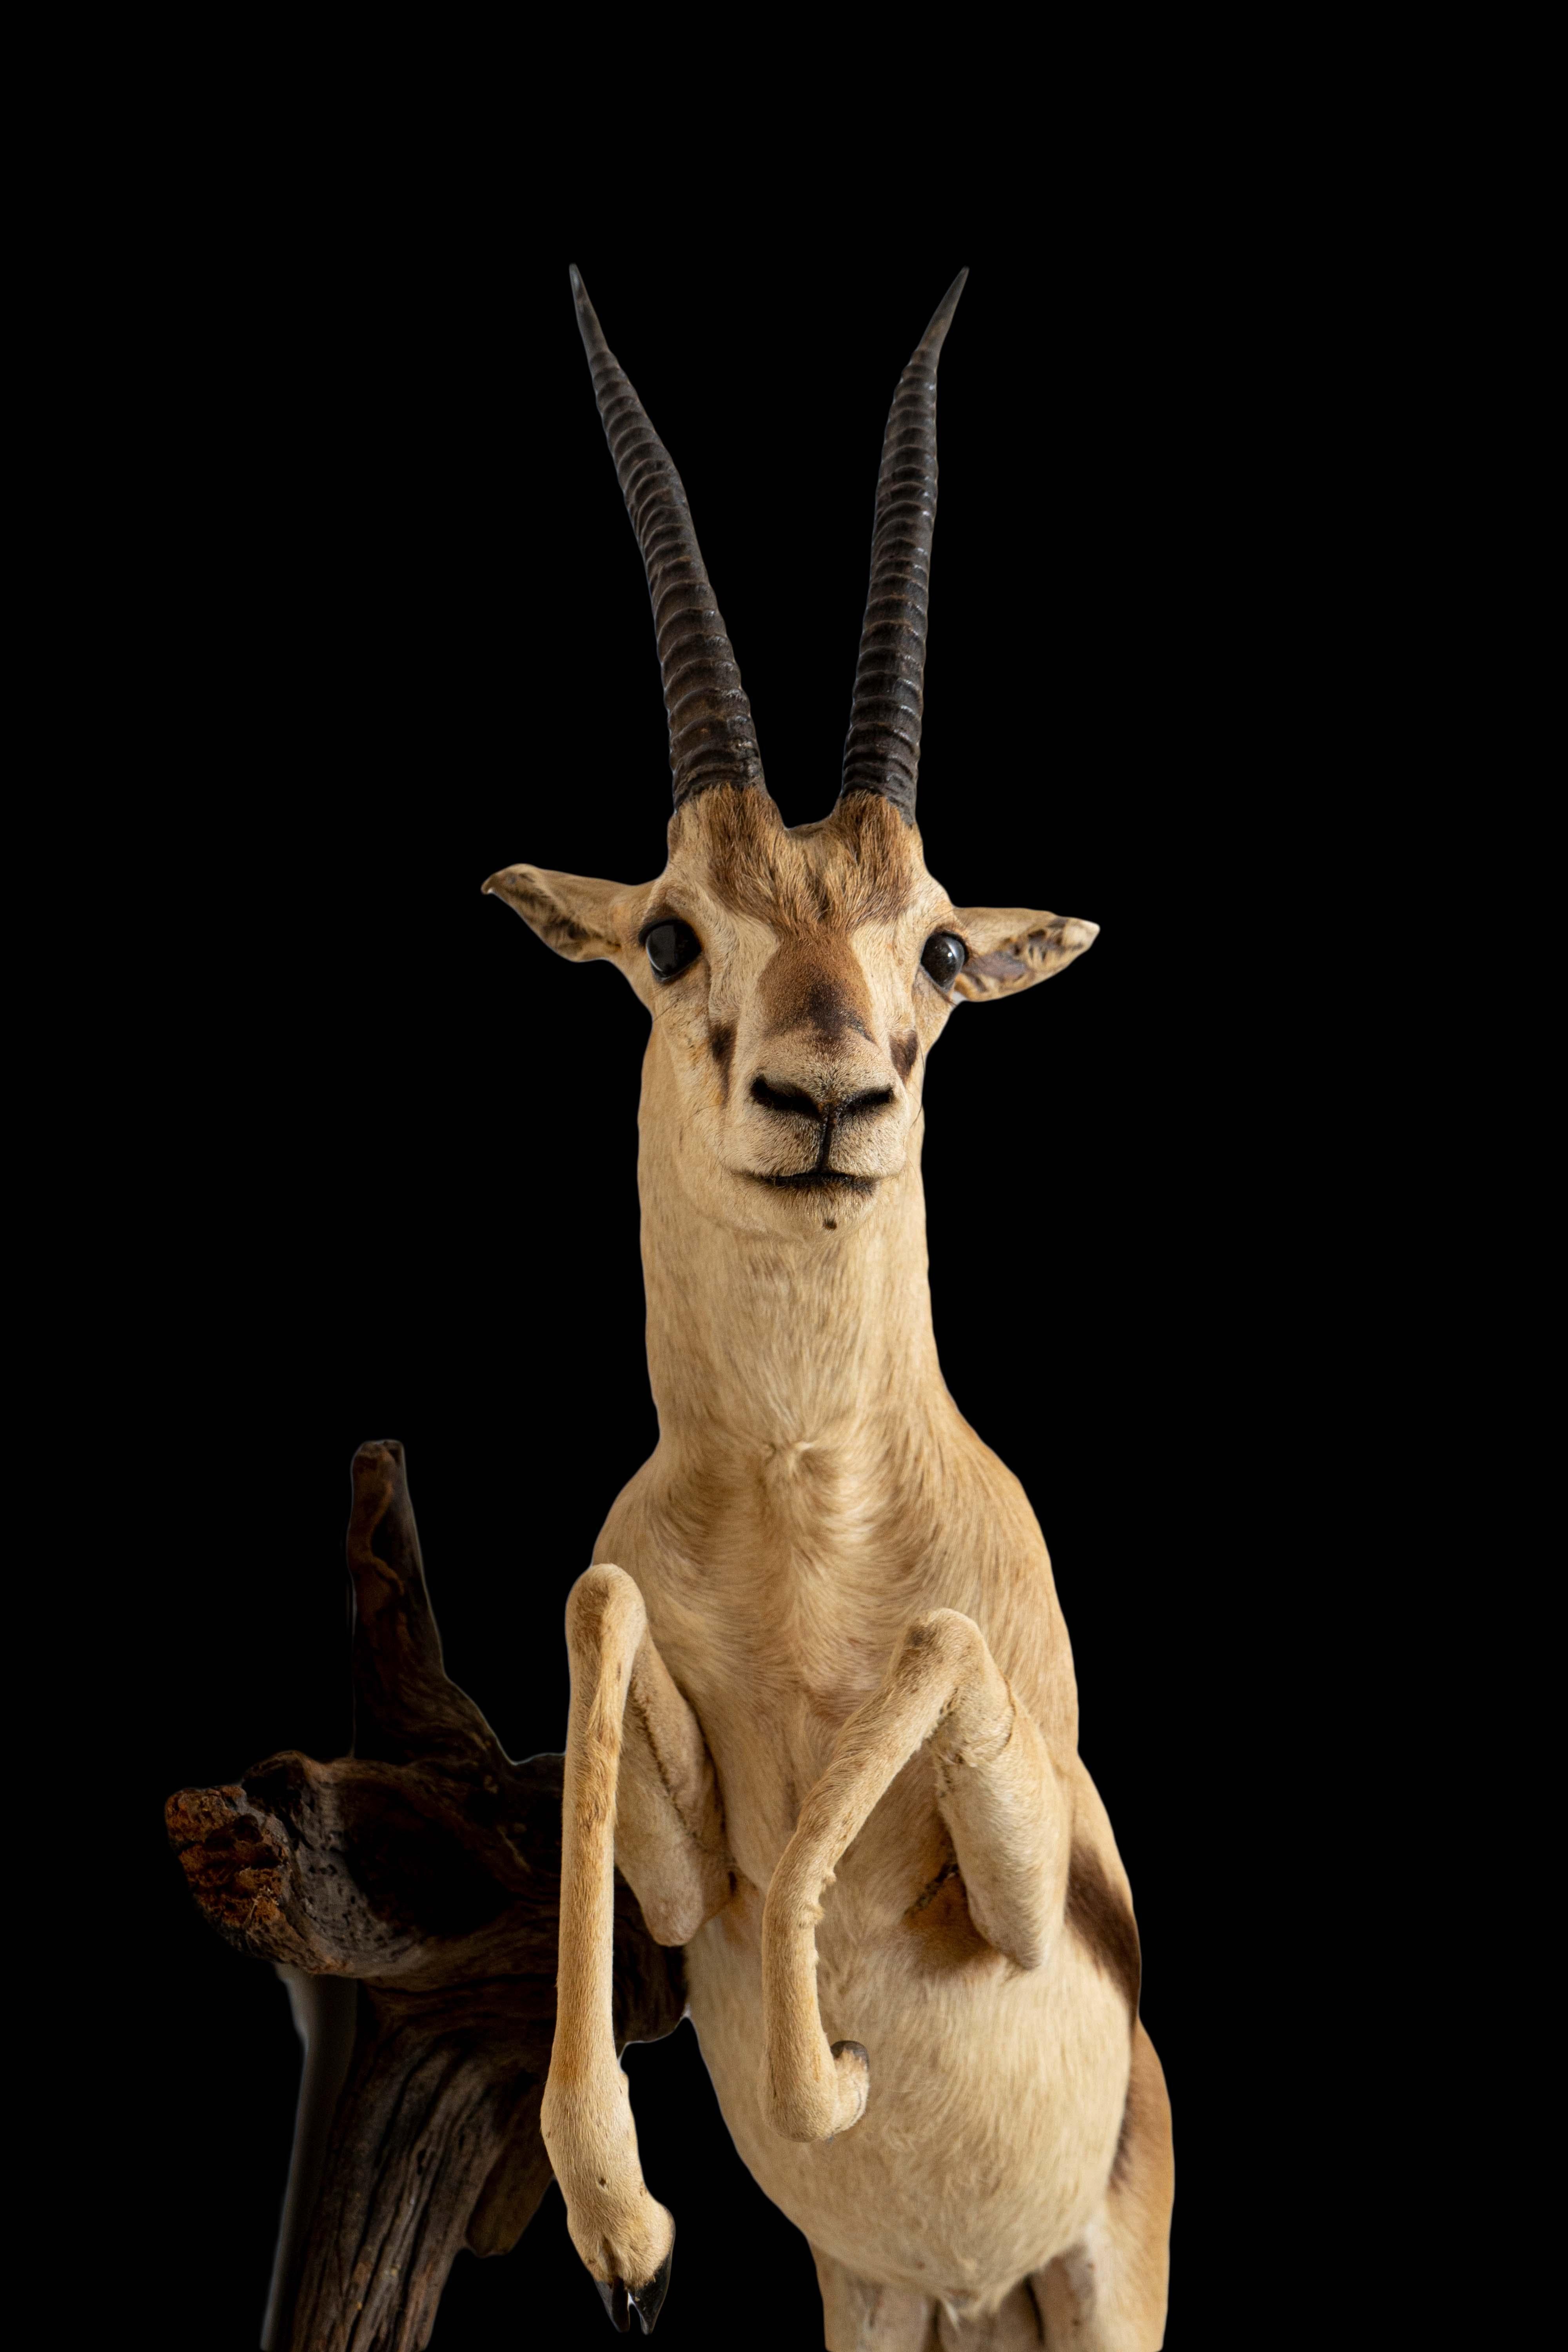 South African Rare Leaping or Stotting Premier Quality Wall Mounted Thomson Gazelle